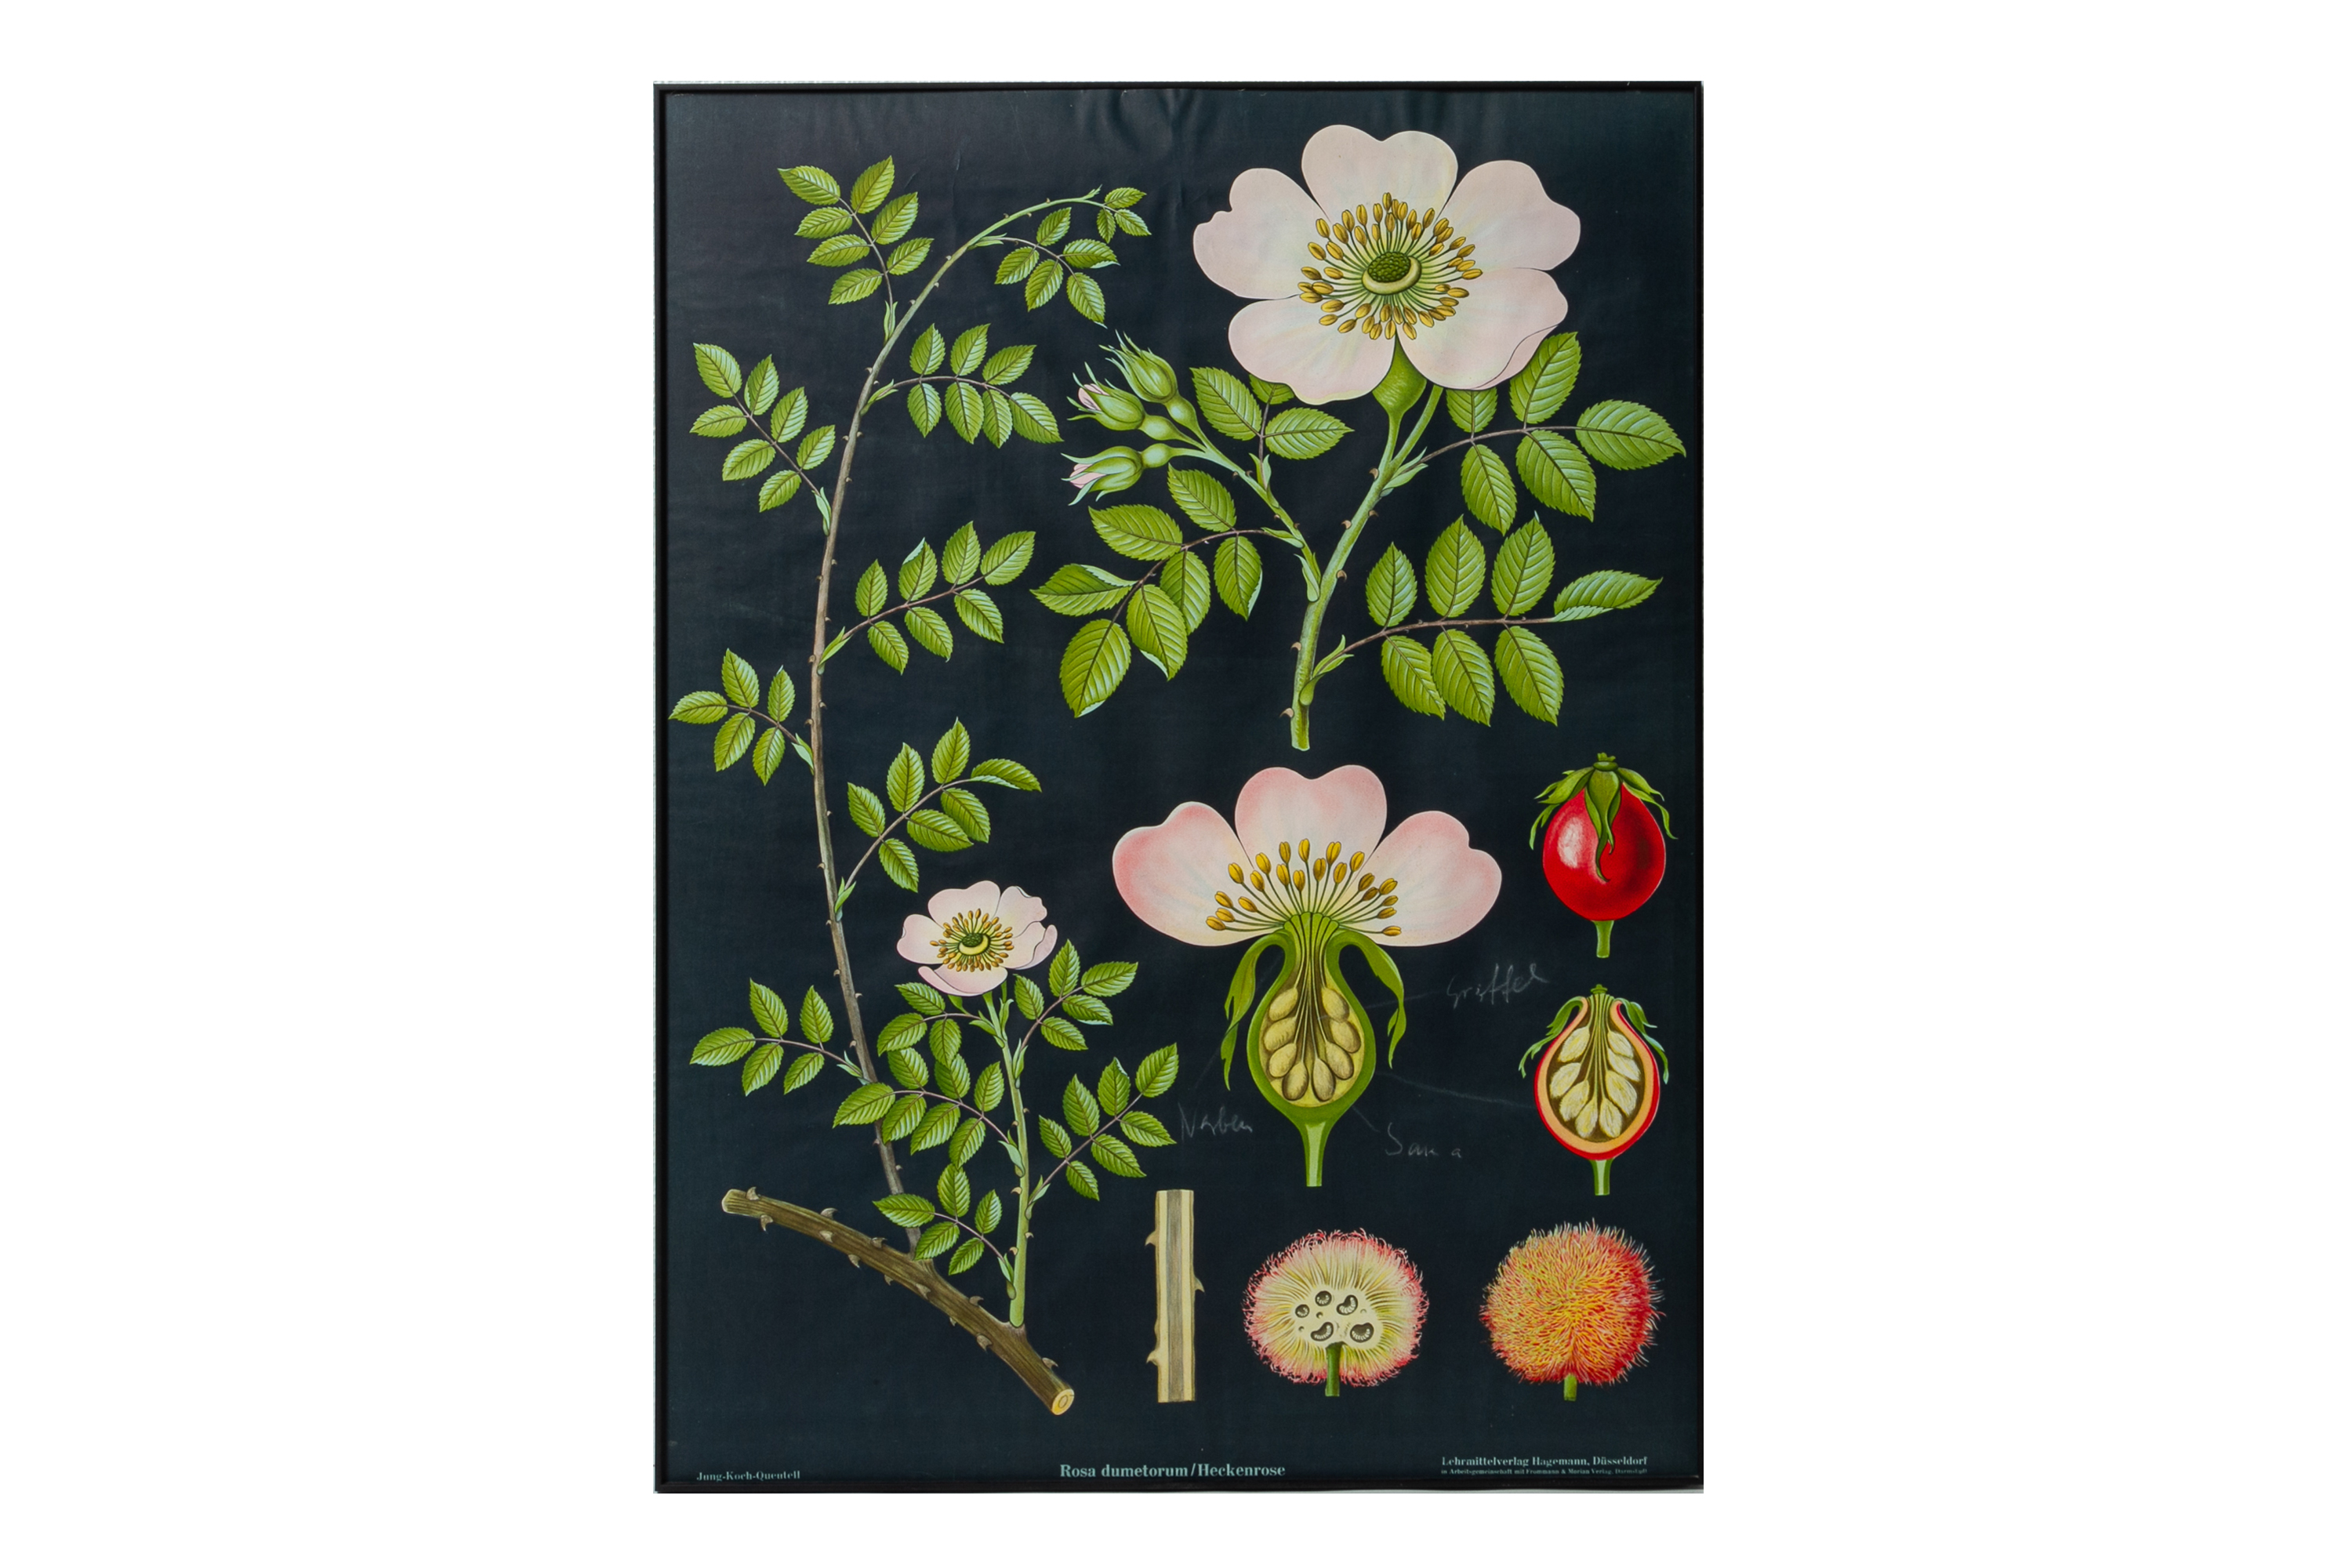 TWO GERMAN EDUCATIONAL POSTERS OF BOTANICALS